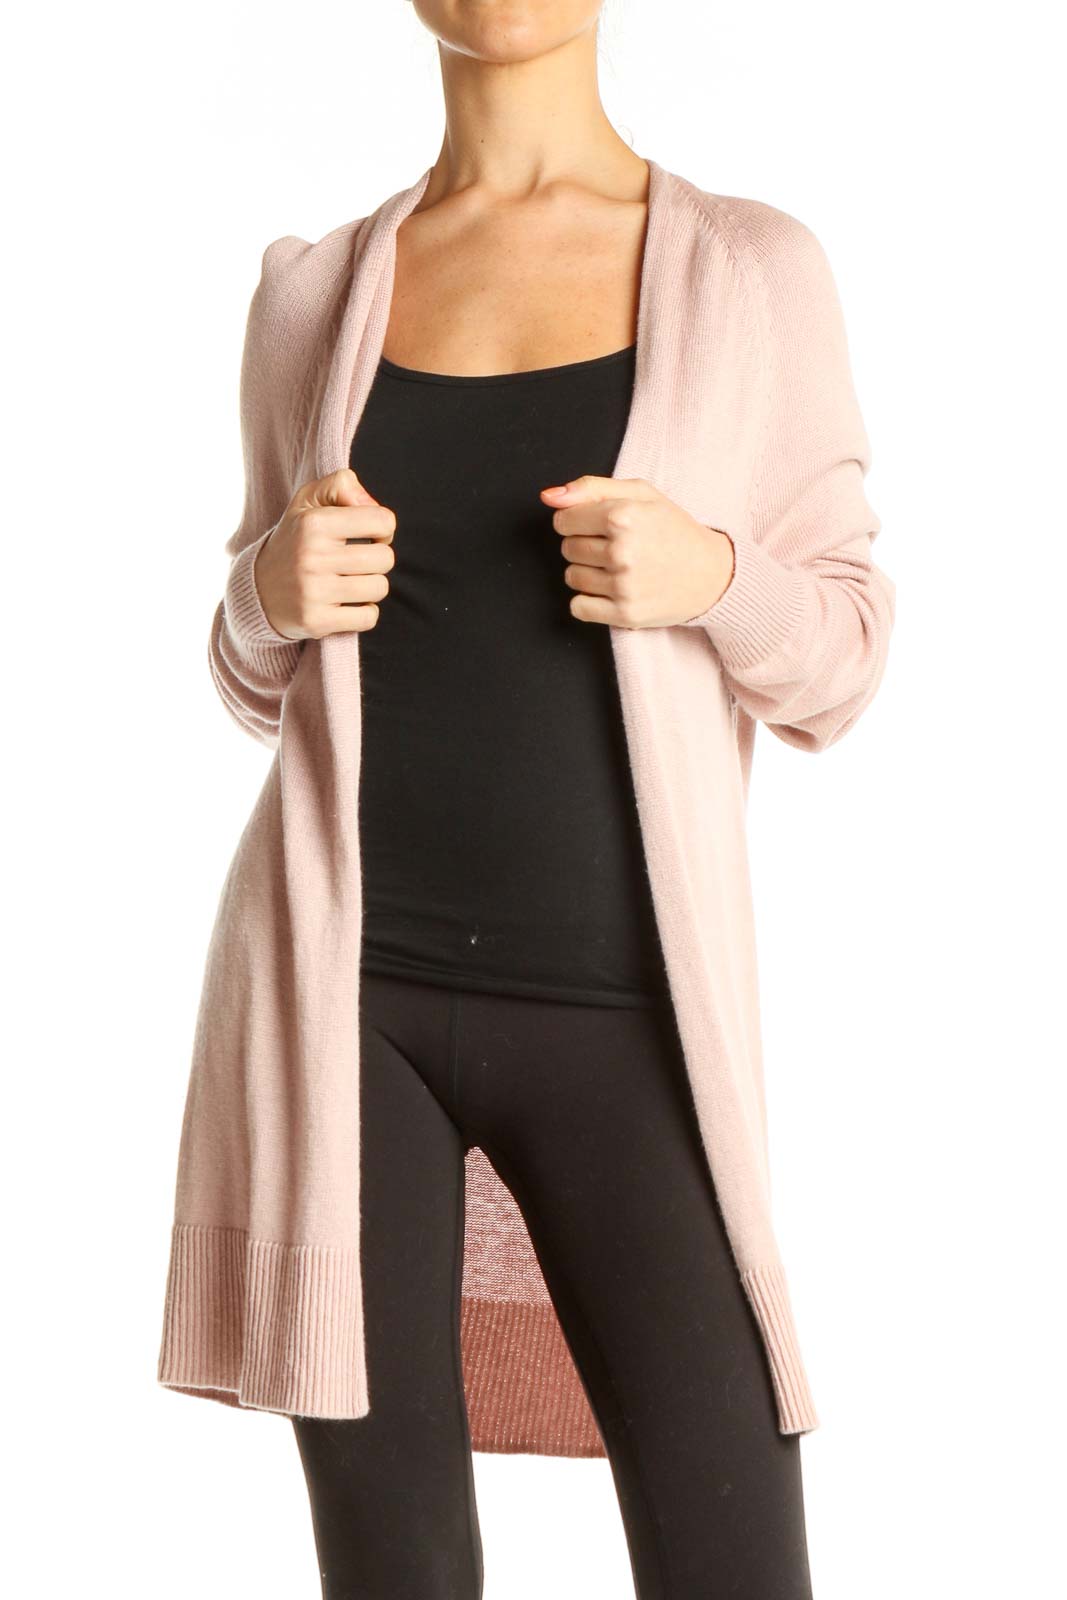 Pink Cardigan Front